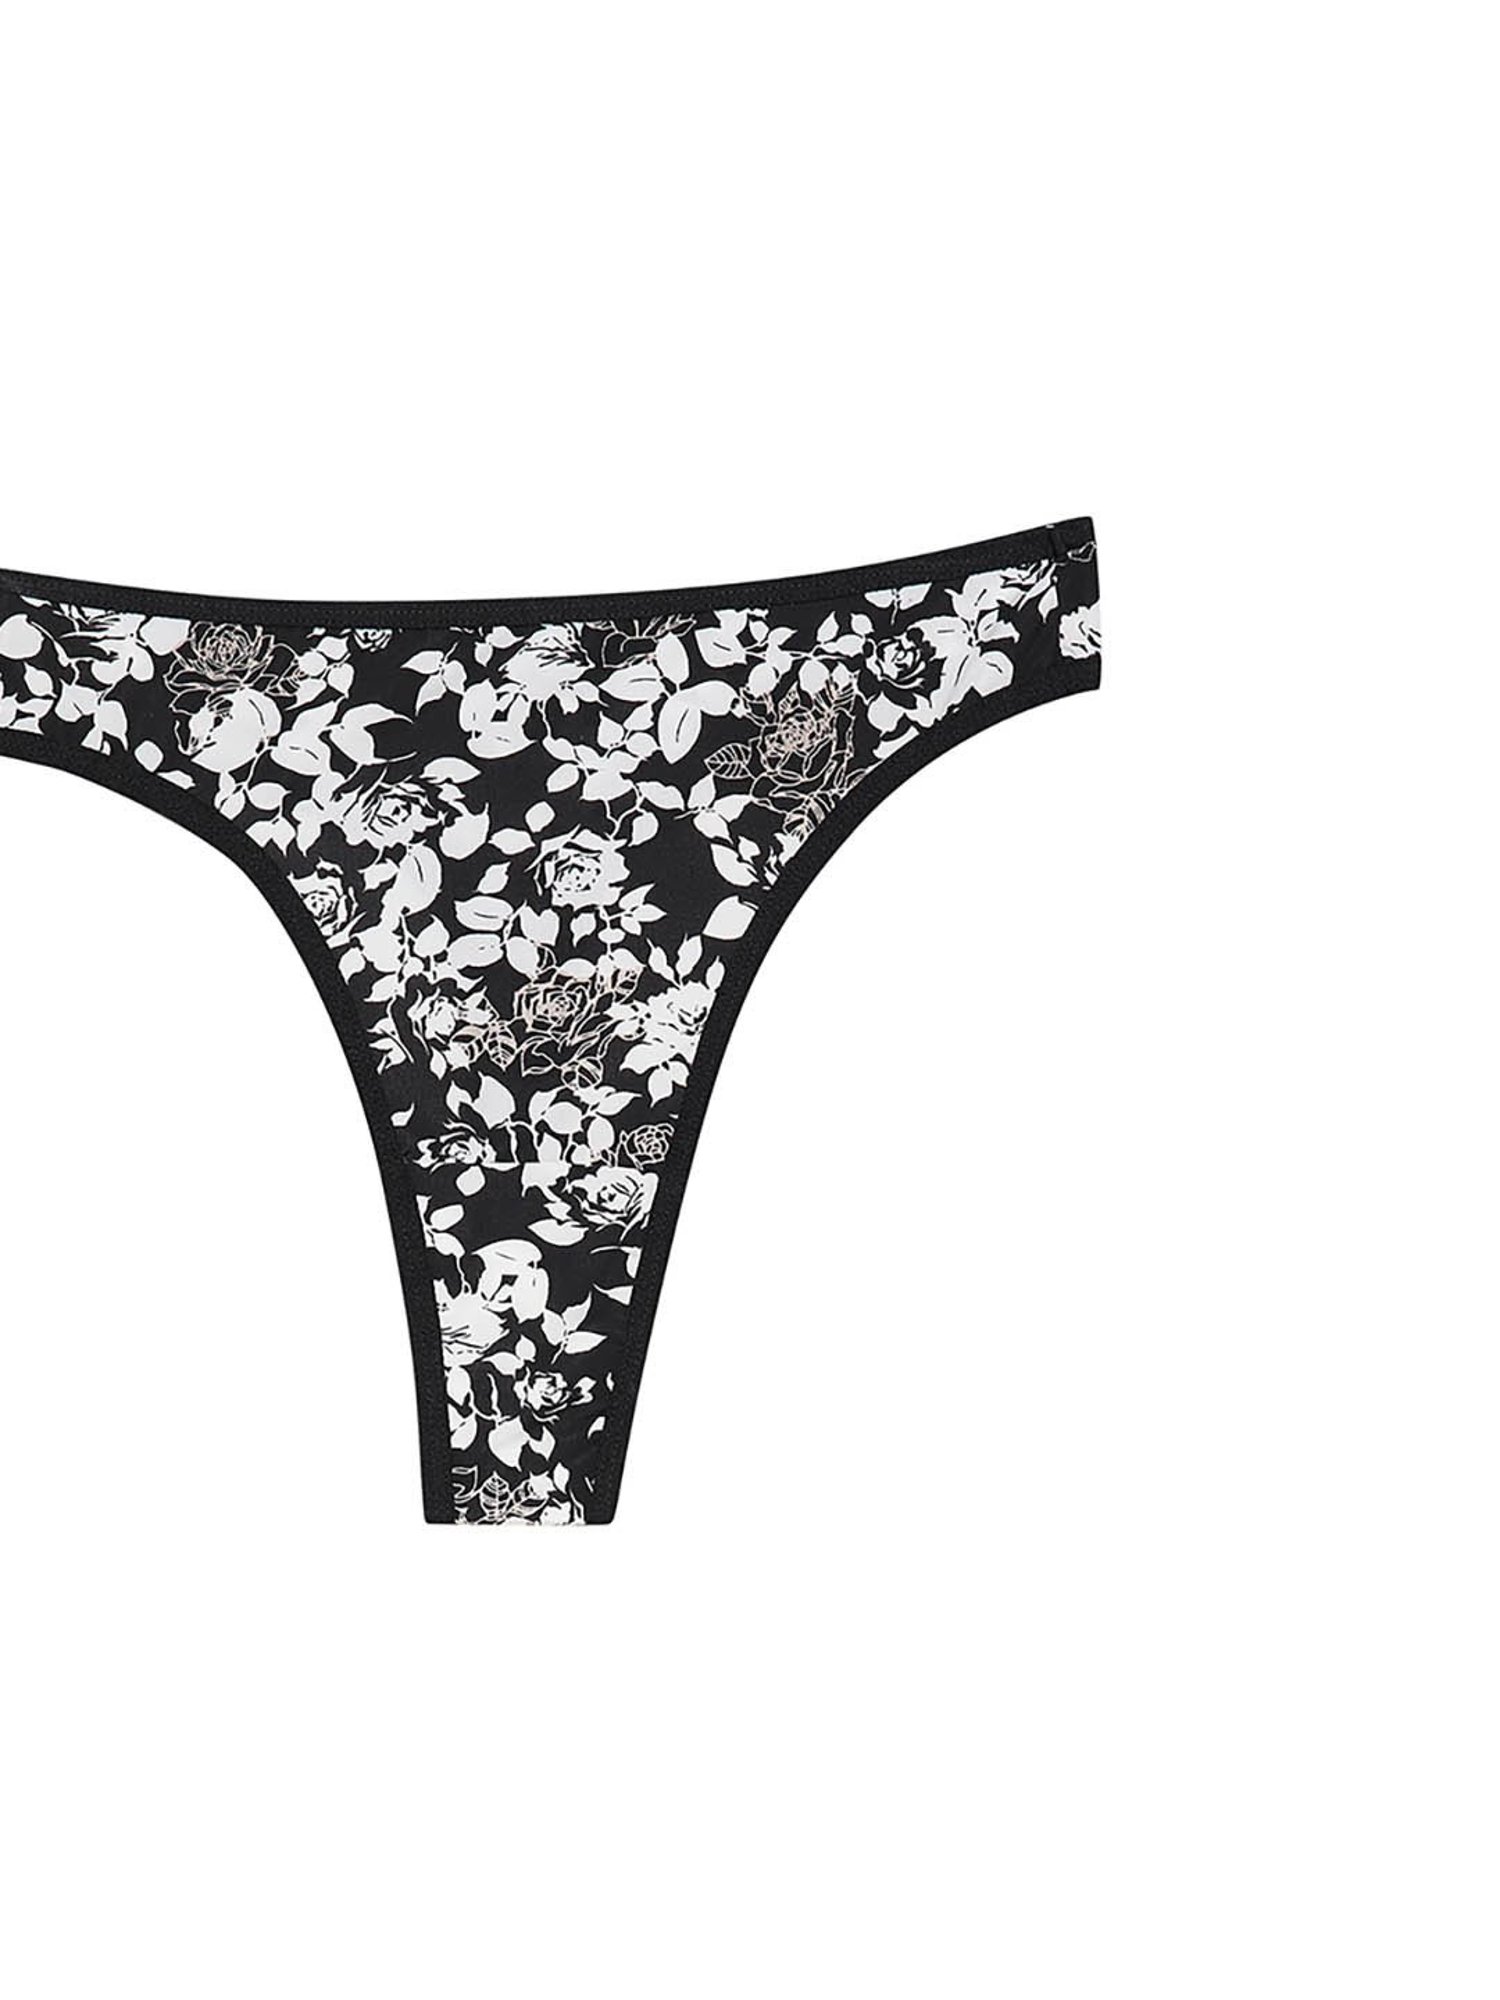 White and Black Girls Floral Printed Cotton Panty at Rs 35/piece in Gurugram